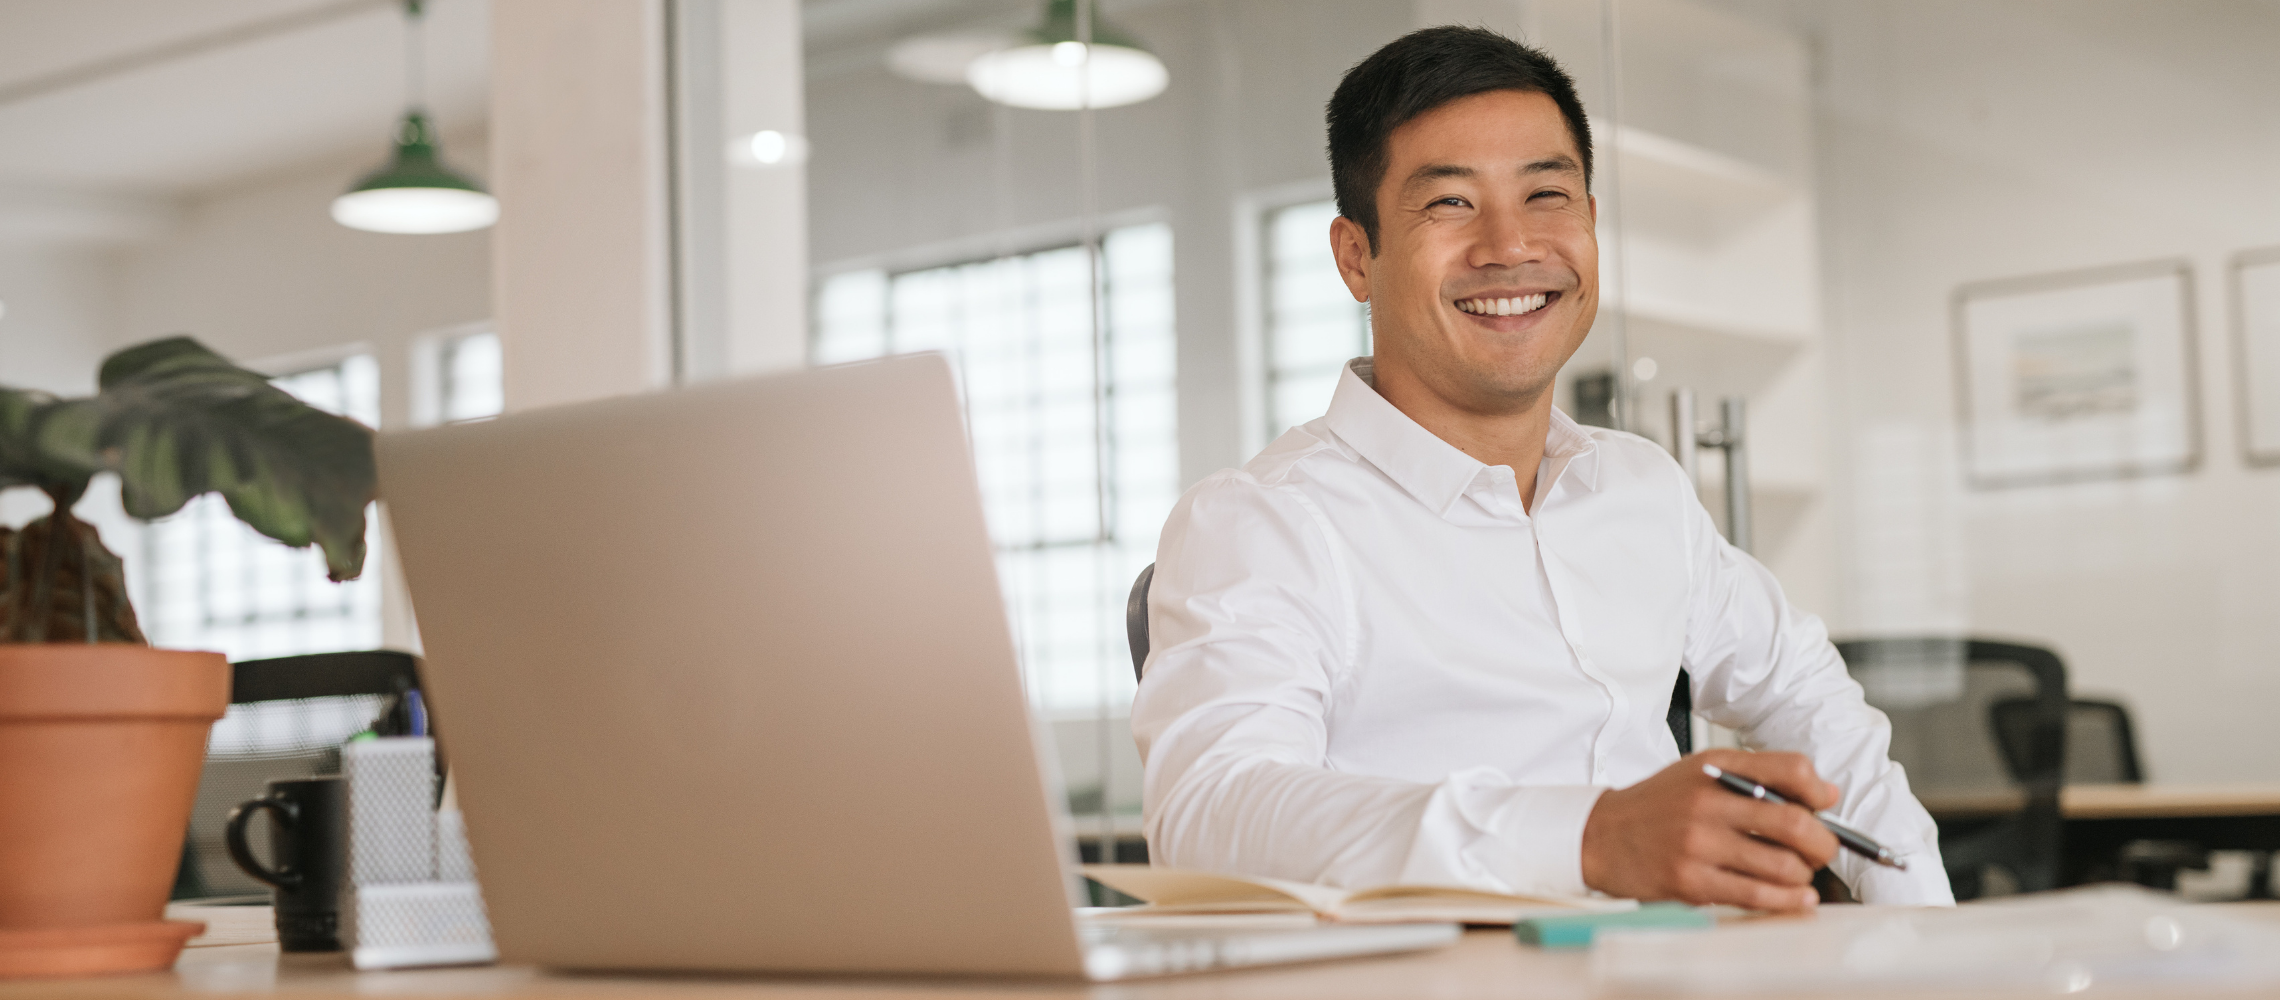 Man at desk with laptop smiling